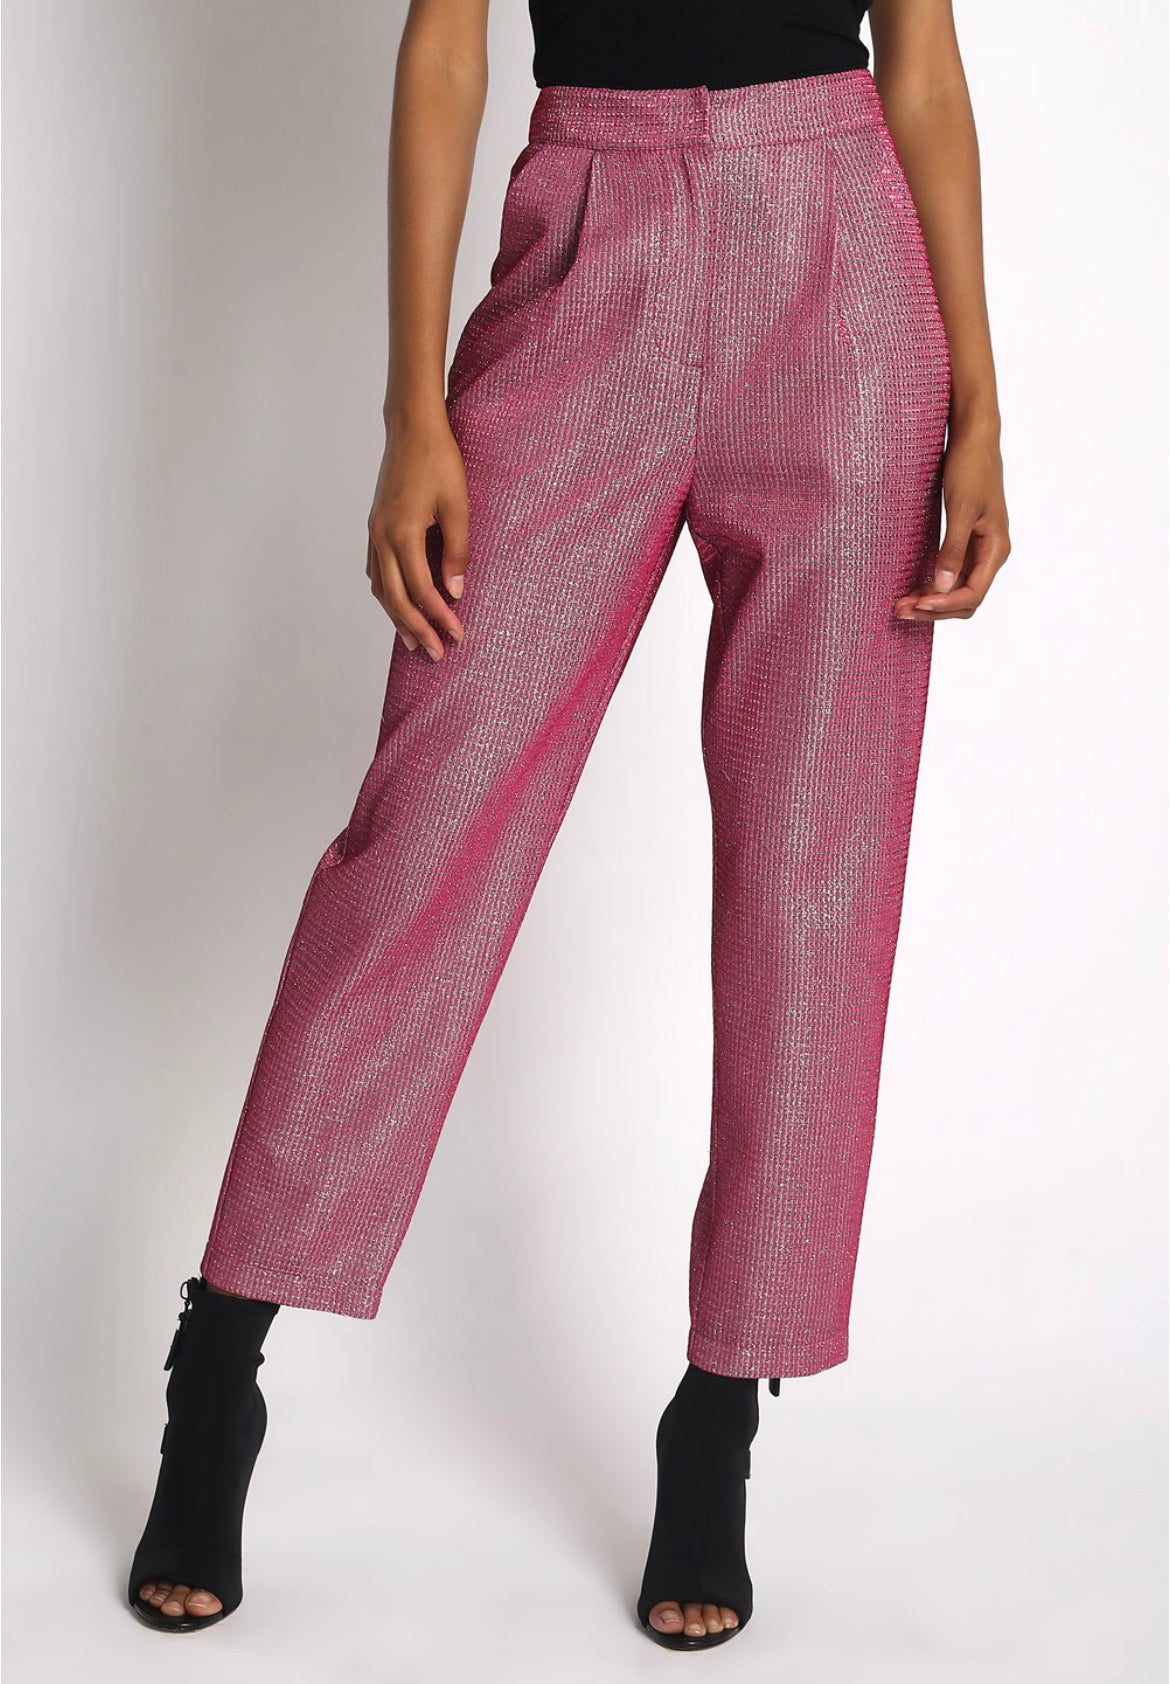 The Rodeo Drive Trousers